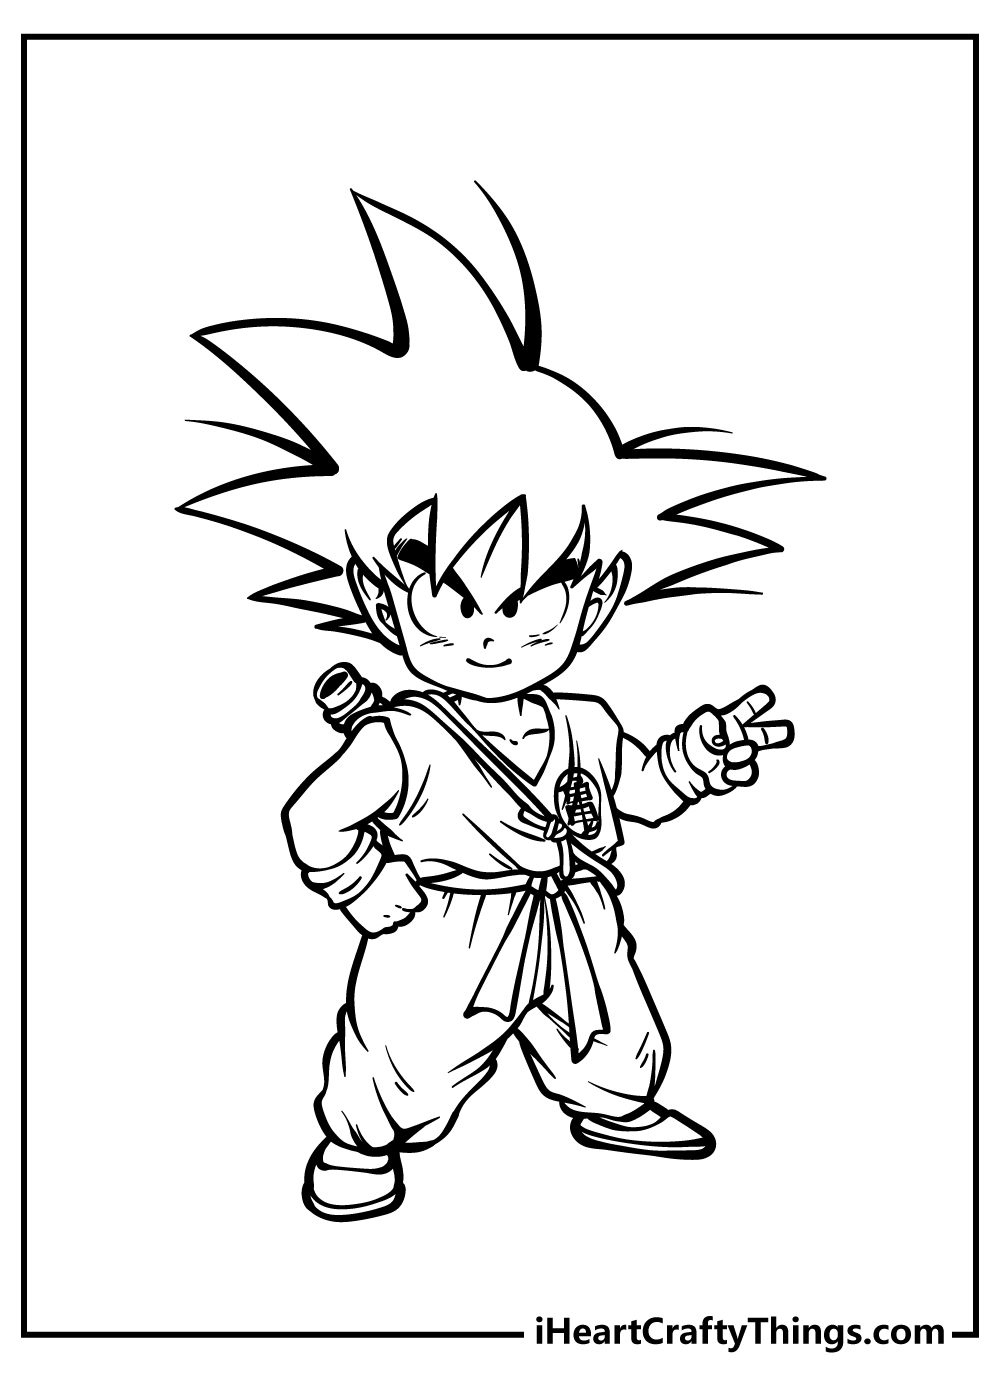 dragon ball z coloring pages kindergarten